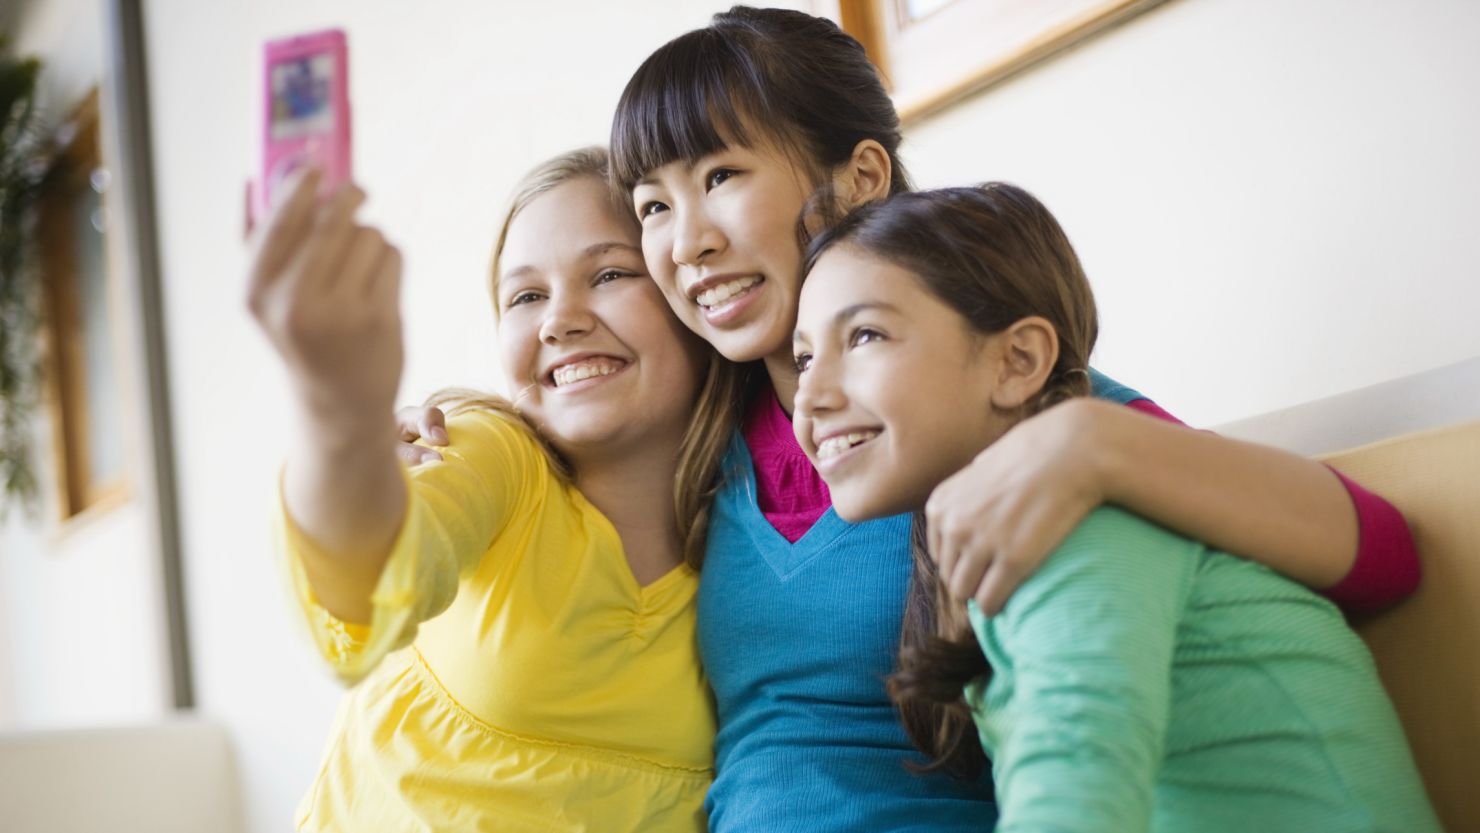 Kids become tweens in the blink of an eye. Are you ready for the change?